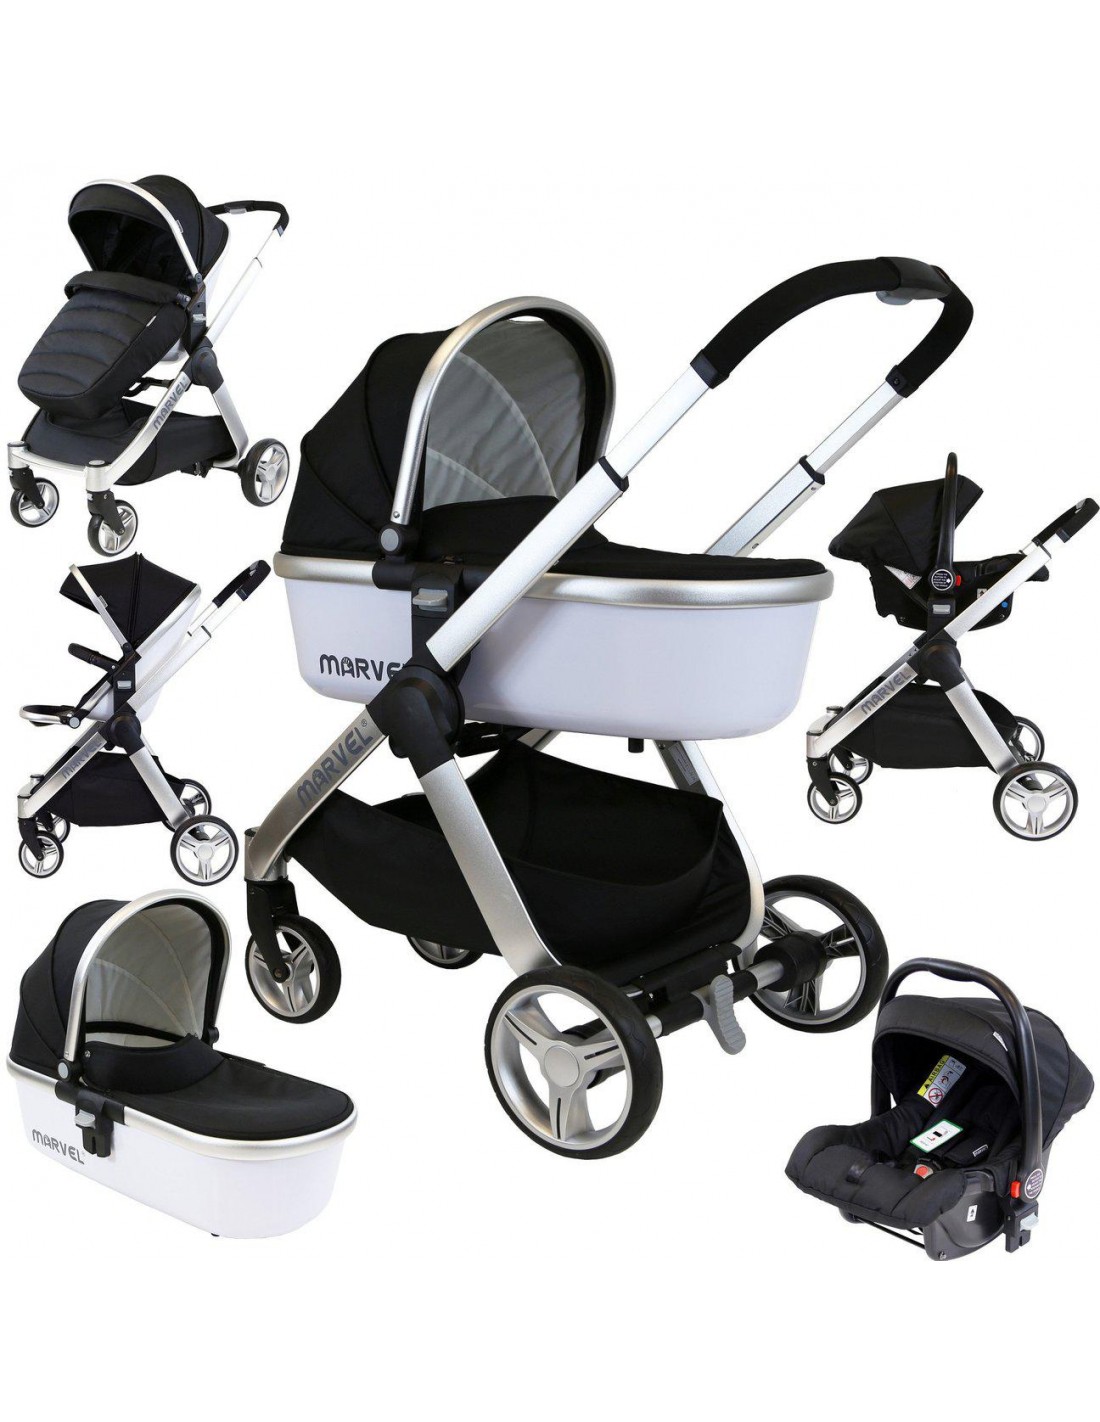 Choosing the right stroller for your baby